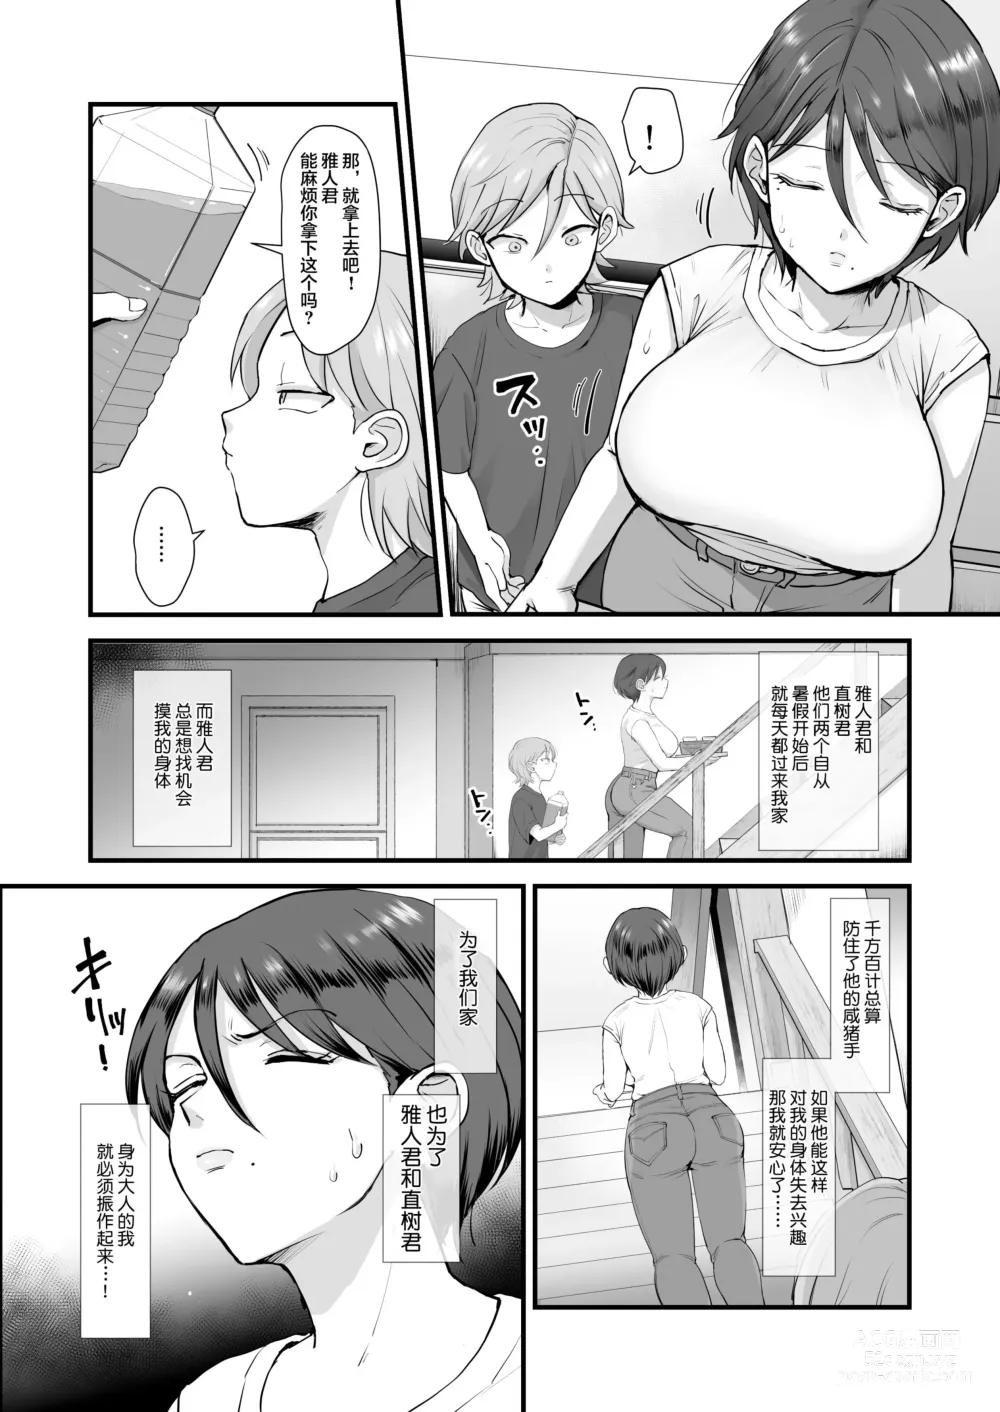 Page 5 of doujinshi sinistra (Eda)] Continued: A laid-back big-breasted mom. [Chinese translation